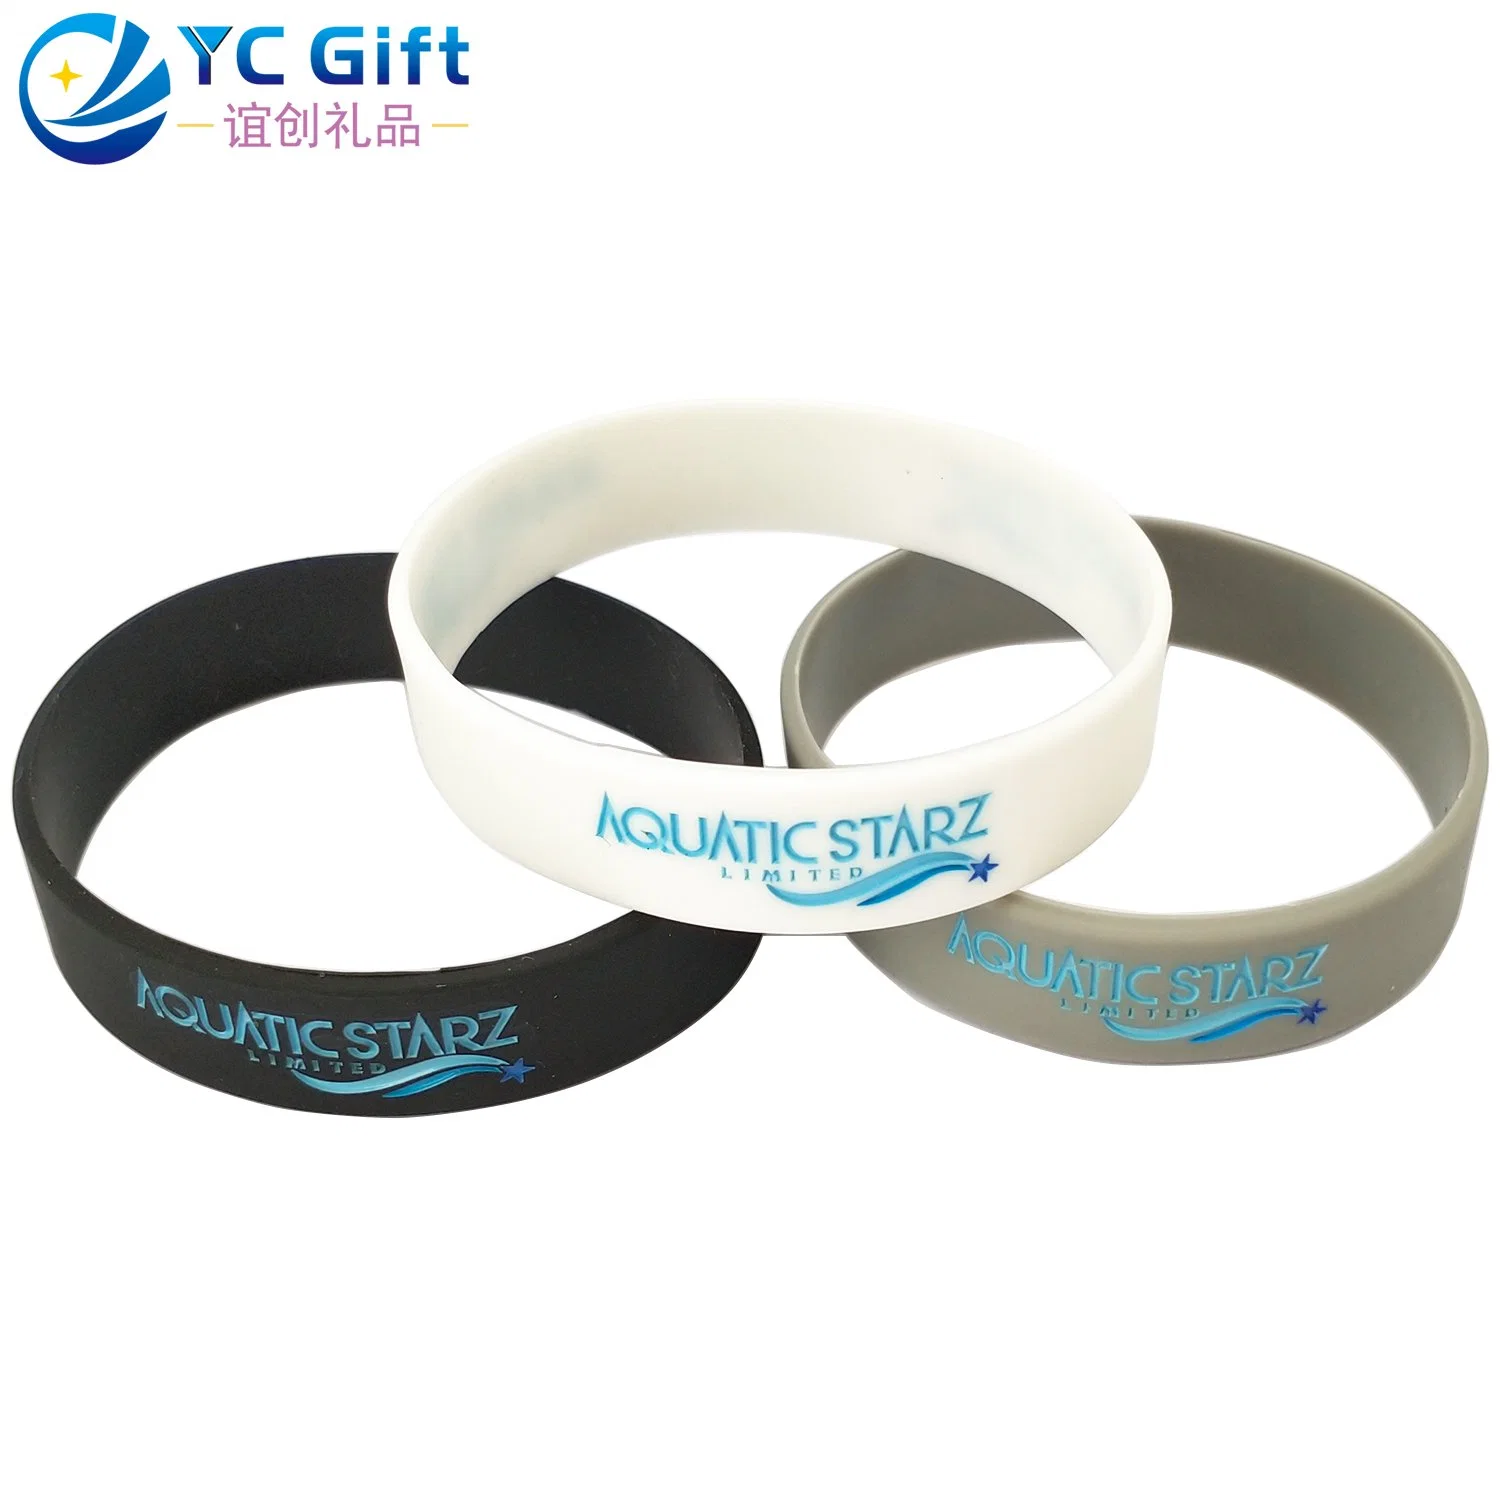 Factory Price Custom Sunken Colorful Silicone Sport Bracelet High quality/High cost performance Marathon Energy Product Rubber Band Kid School Smart Wristband for Promotional Gift